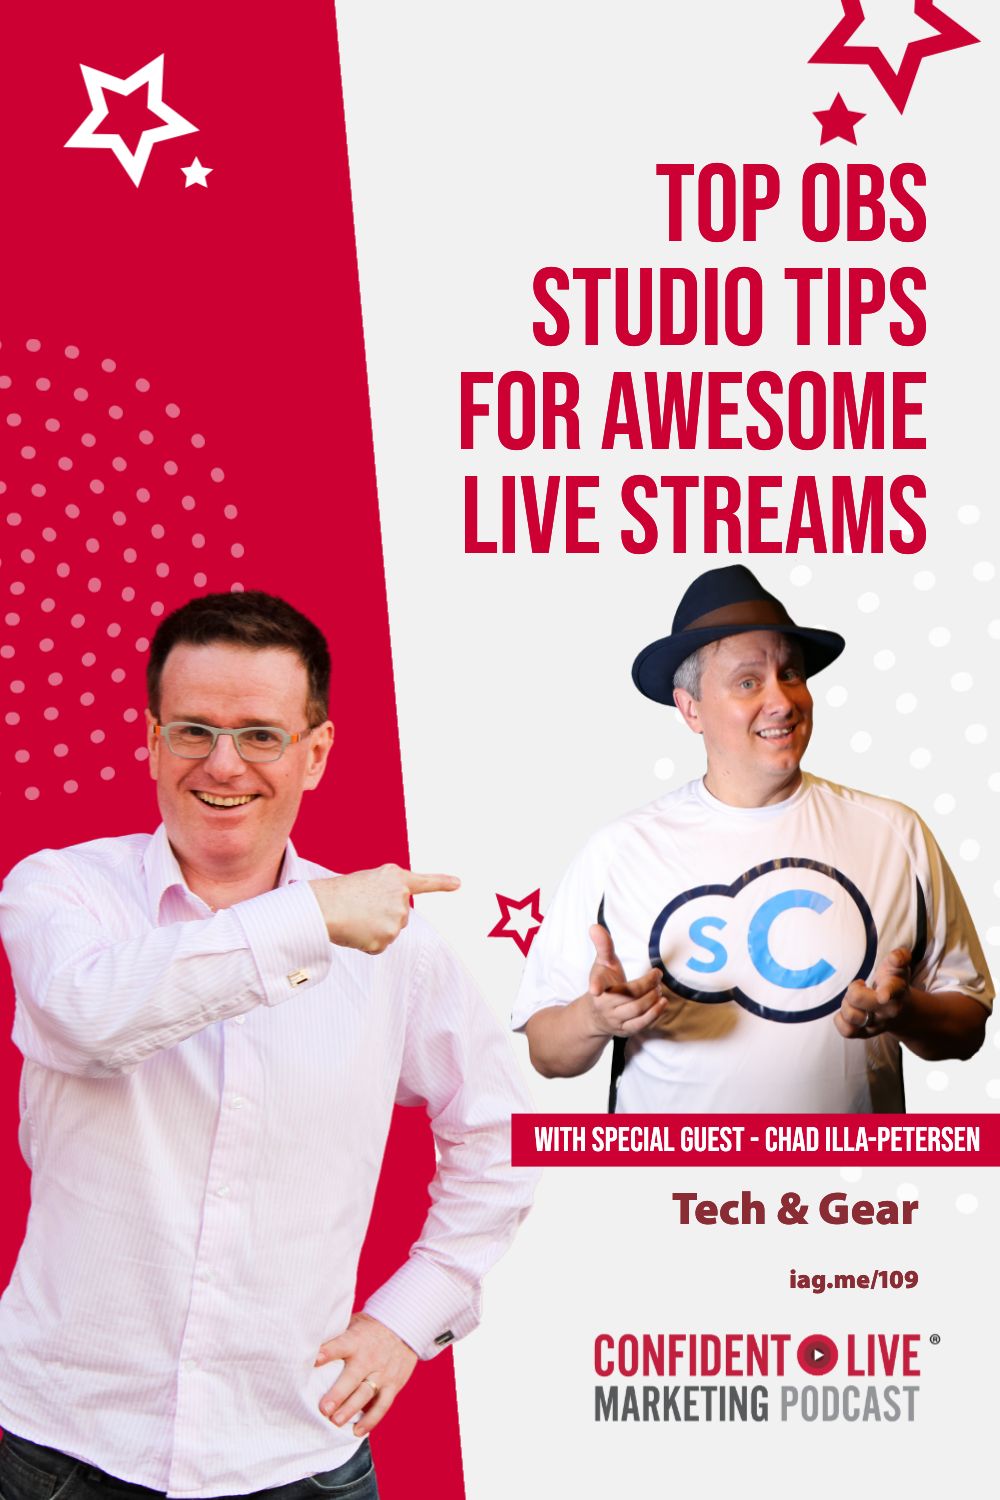 Top OBS Studio Tips for Awesome Live Streams